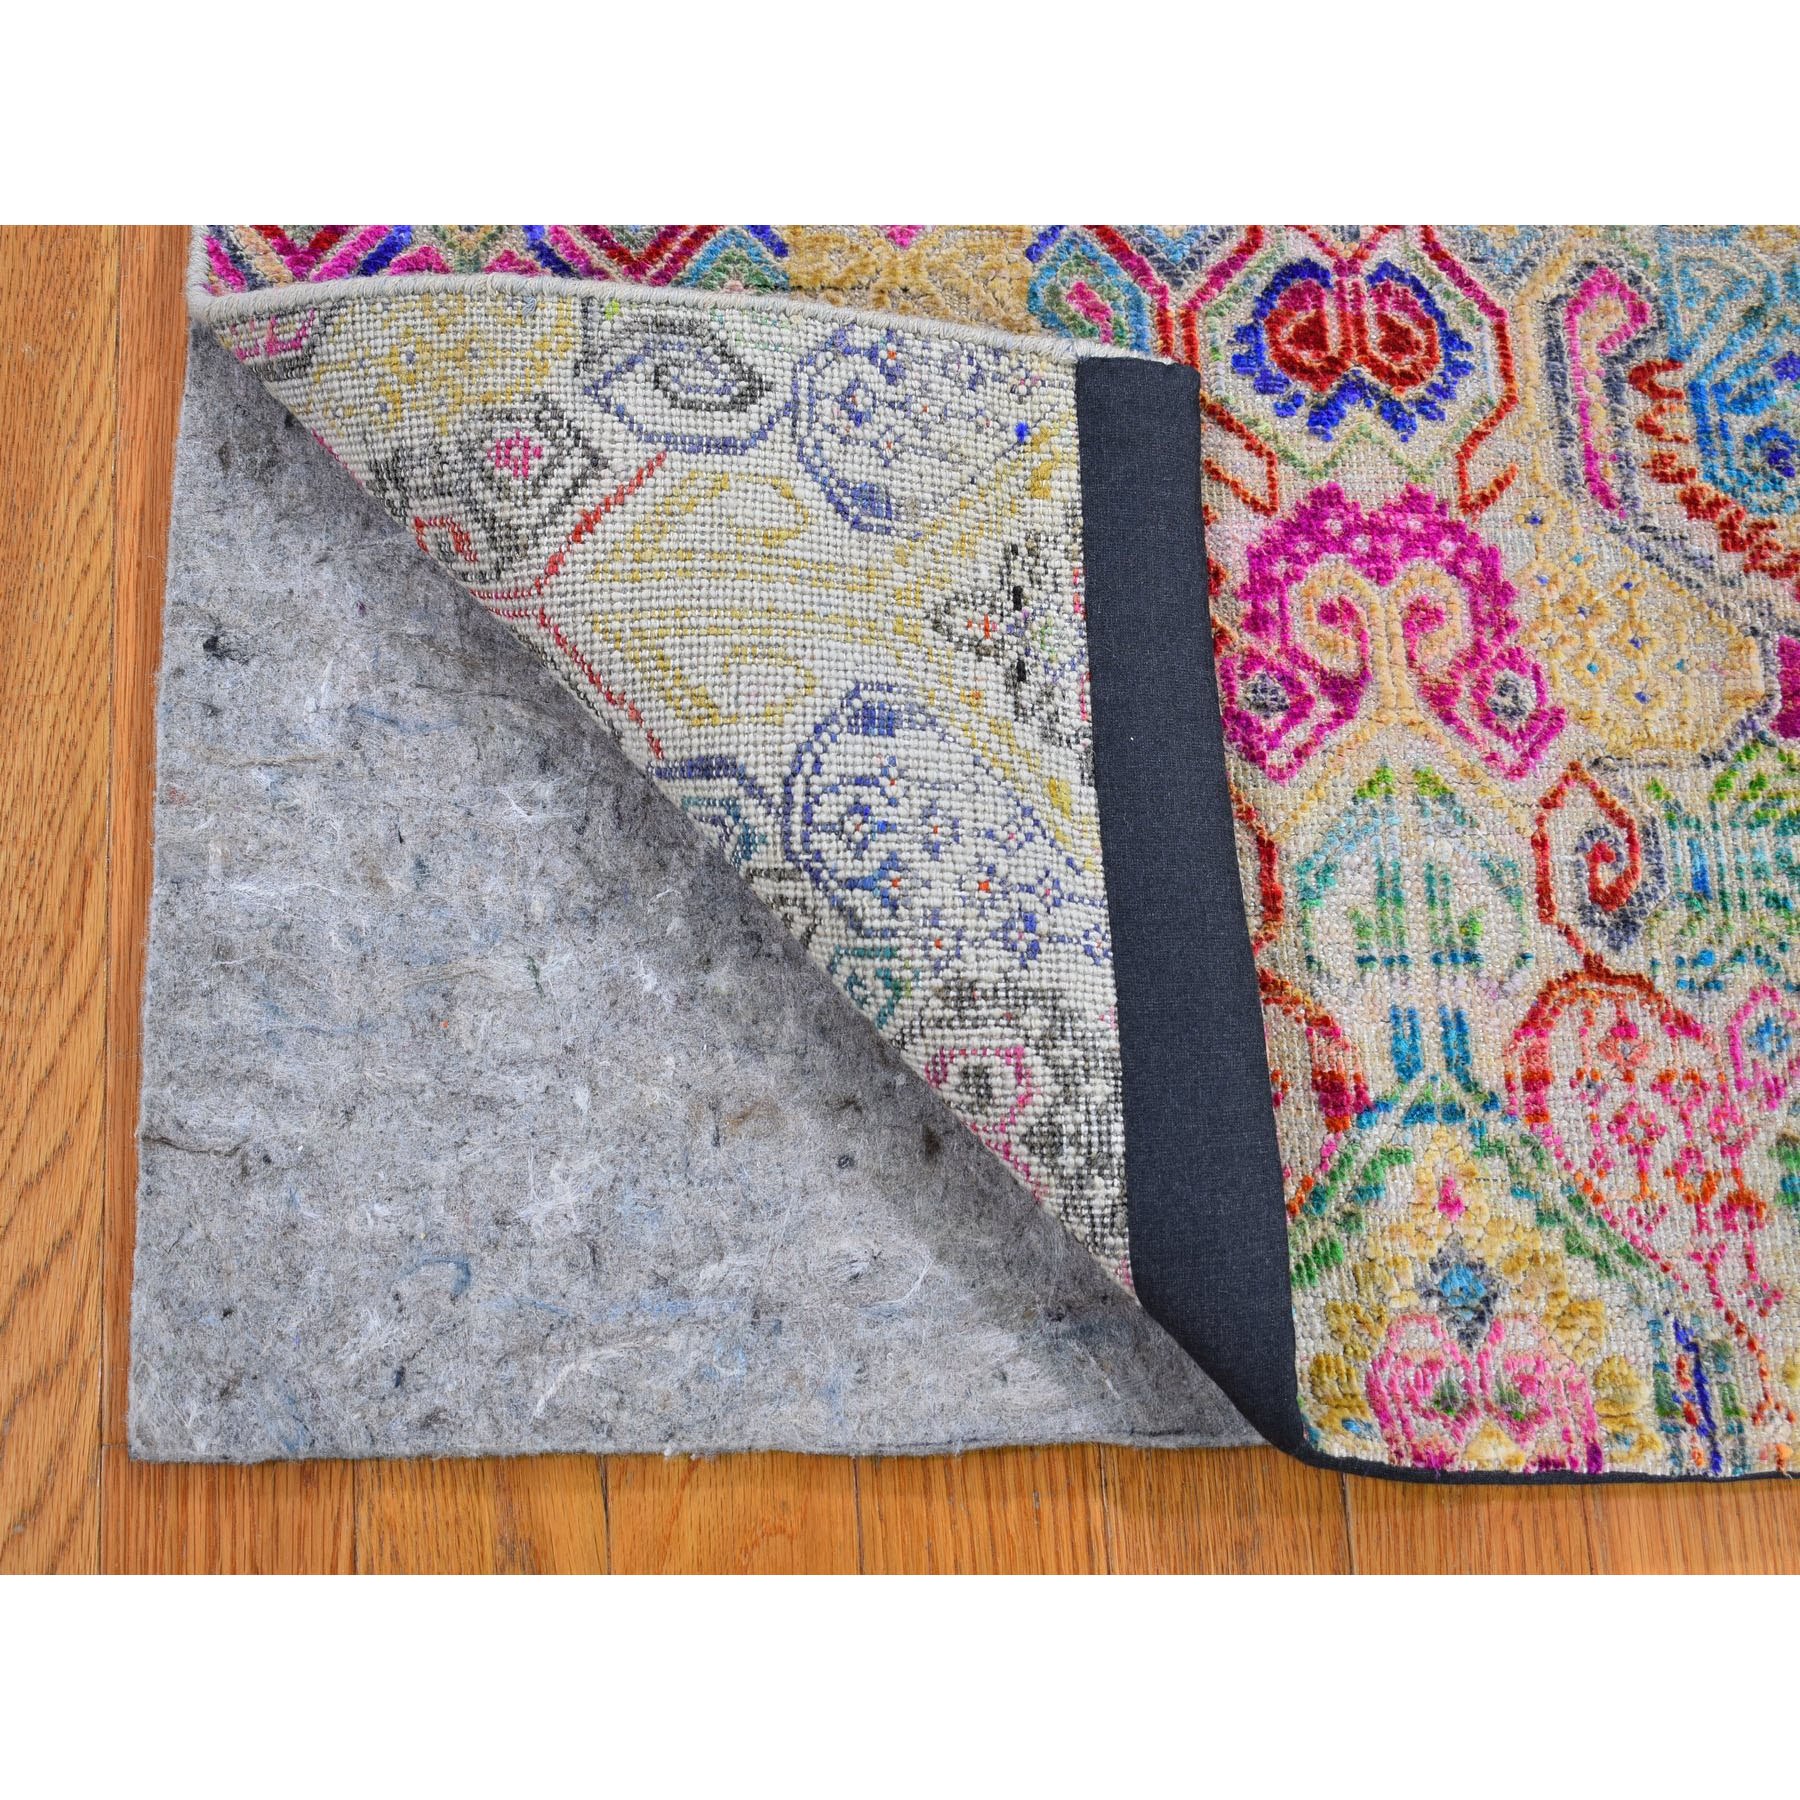 4-x5-10  Multicolor Jewellery Design Sari Silk With Textured Wool Hand Knotted Oriental Rug 